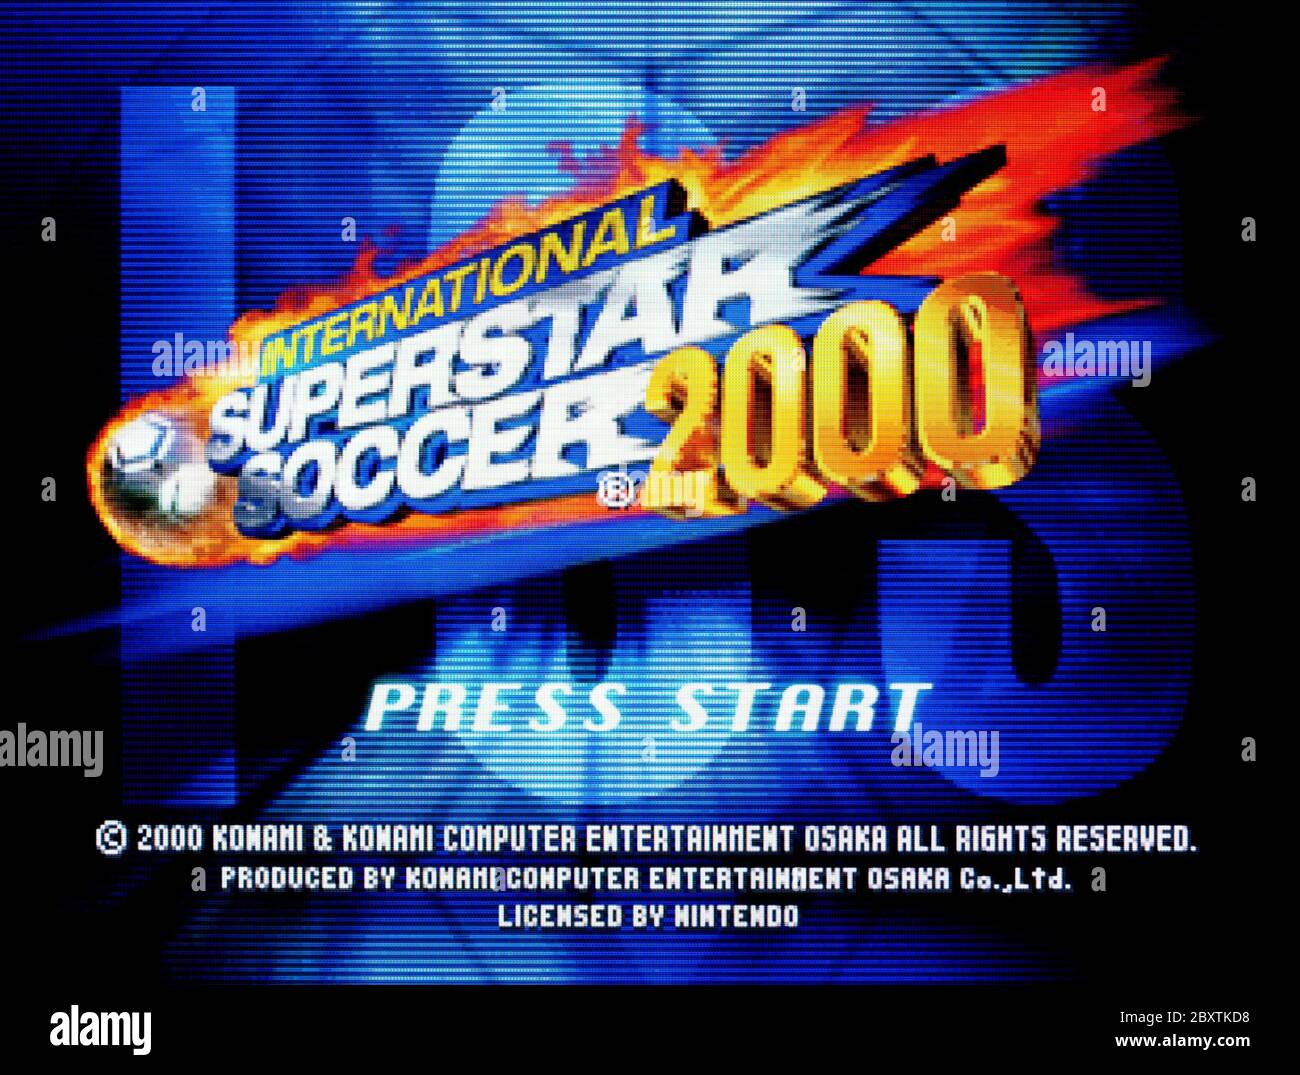 International Superstar Soccer 64 High Resolution Stock Photography And Images Alamy